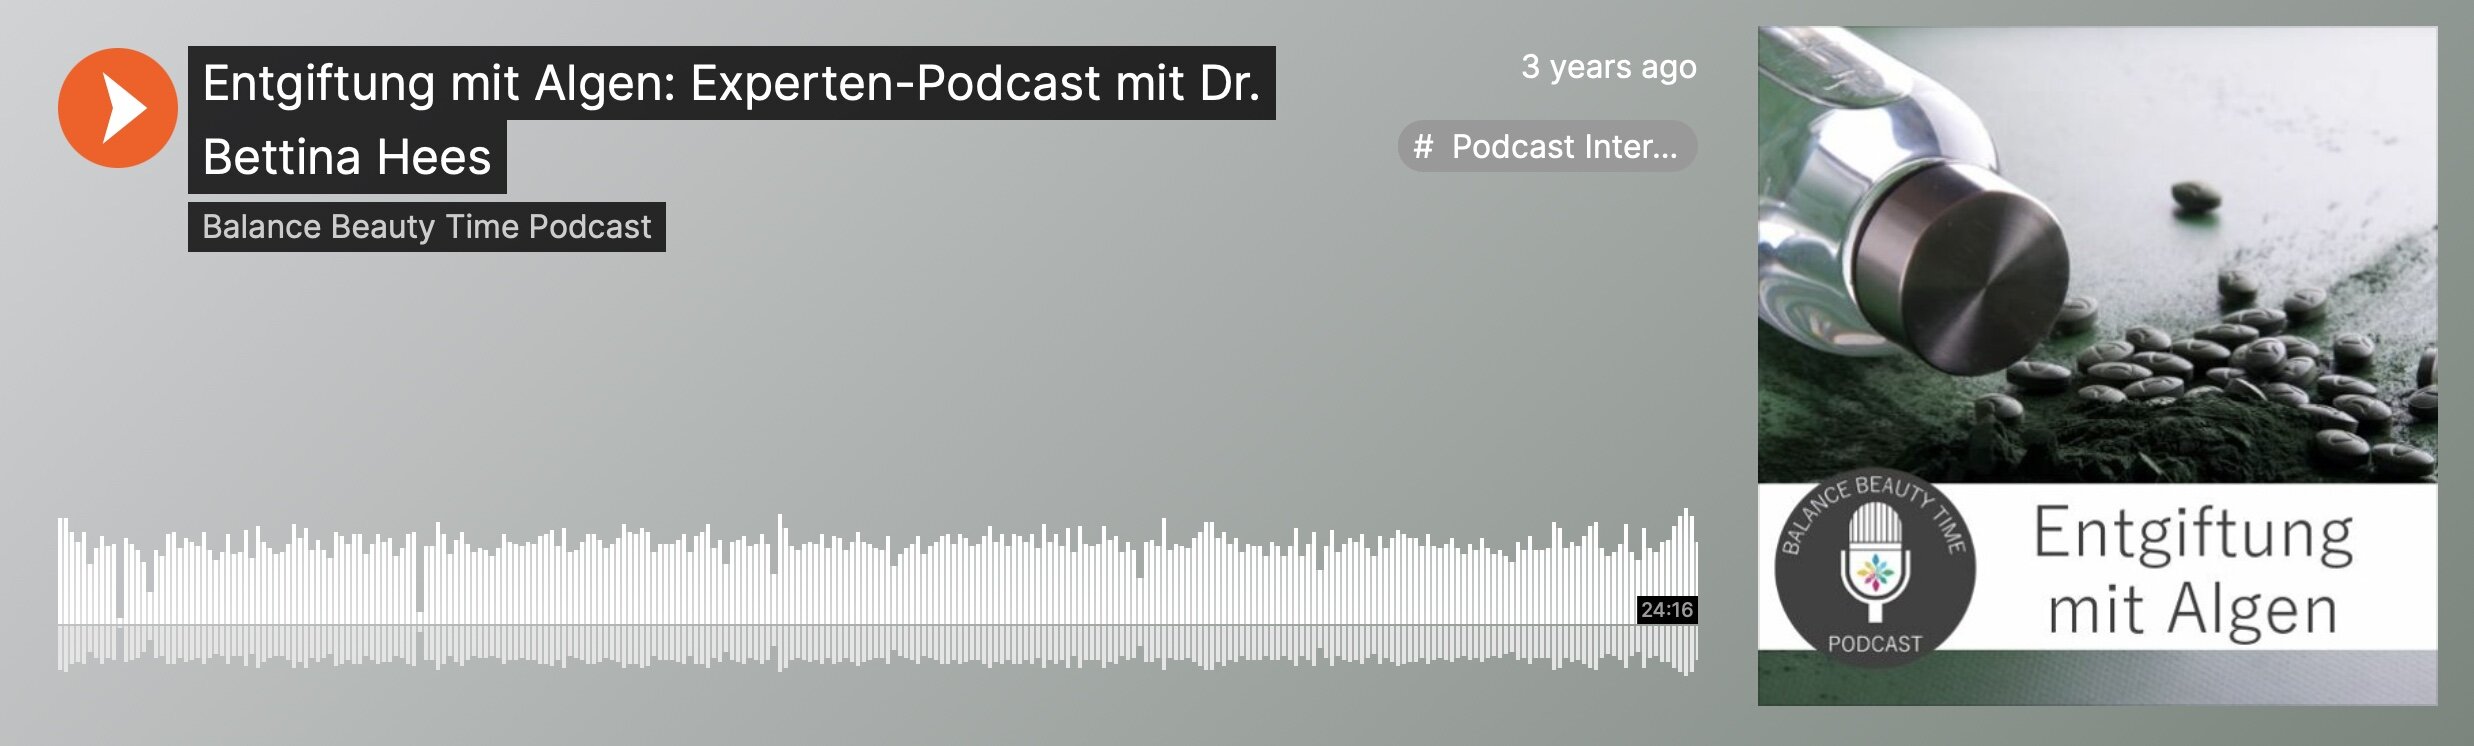 Entgiftung mit Algen Podcast Dr. Bettina Hees